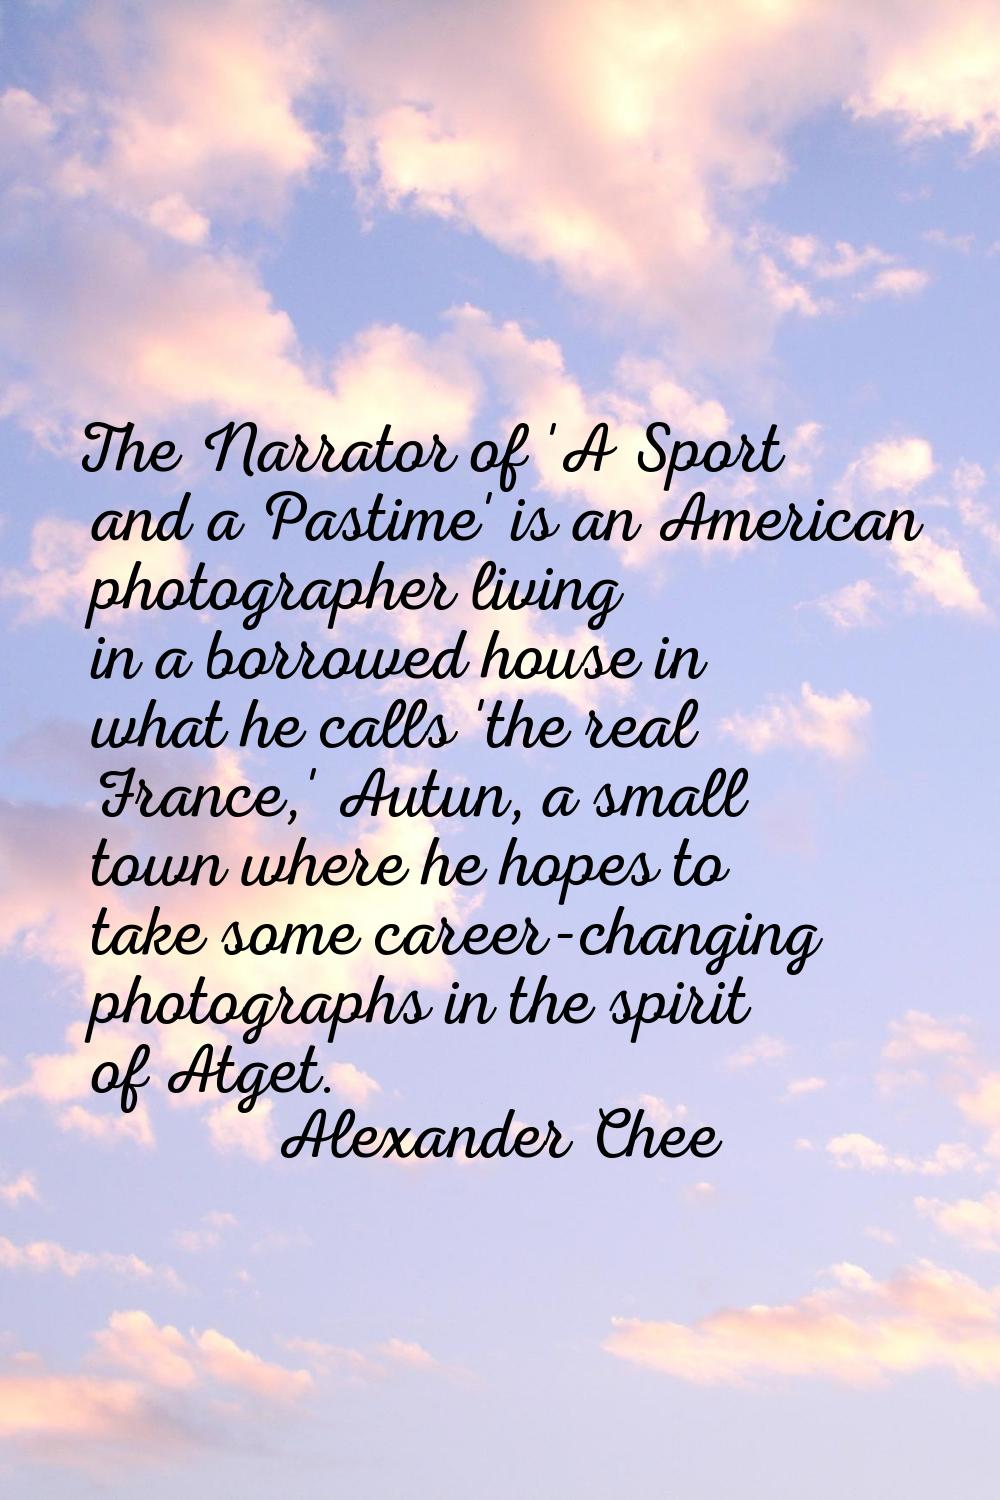 The Narrator of 'A Sport and a Pastime' is an American photographer living in a borrowed house in w